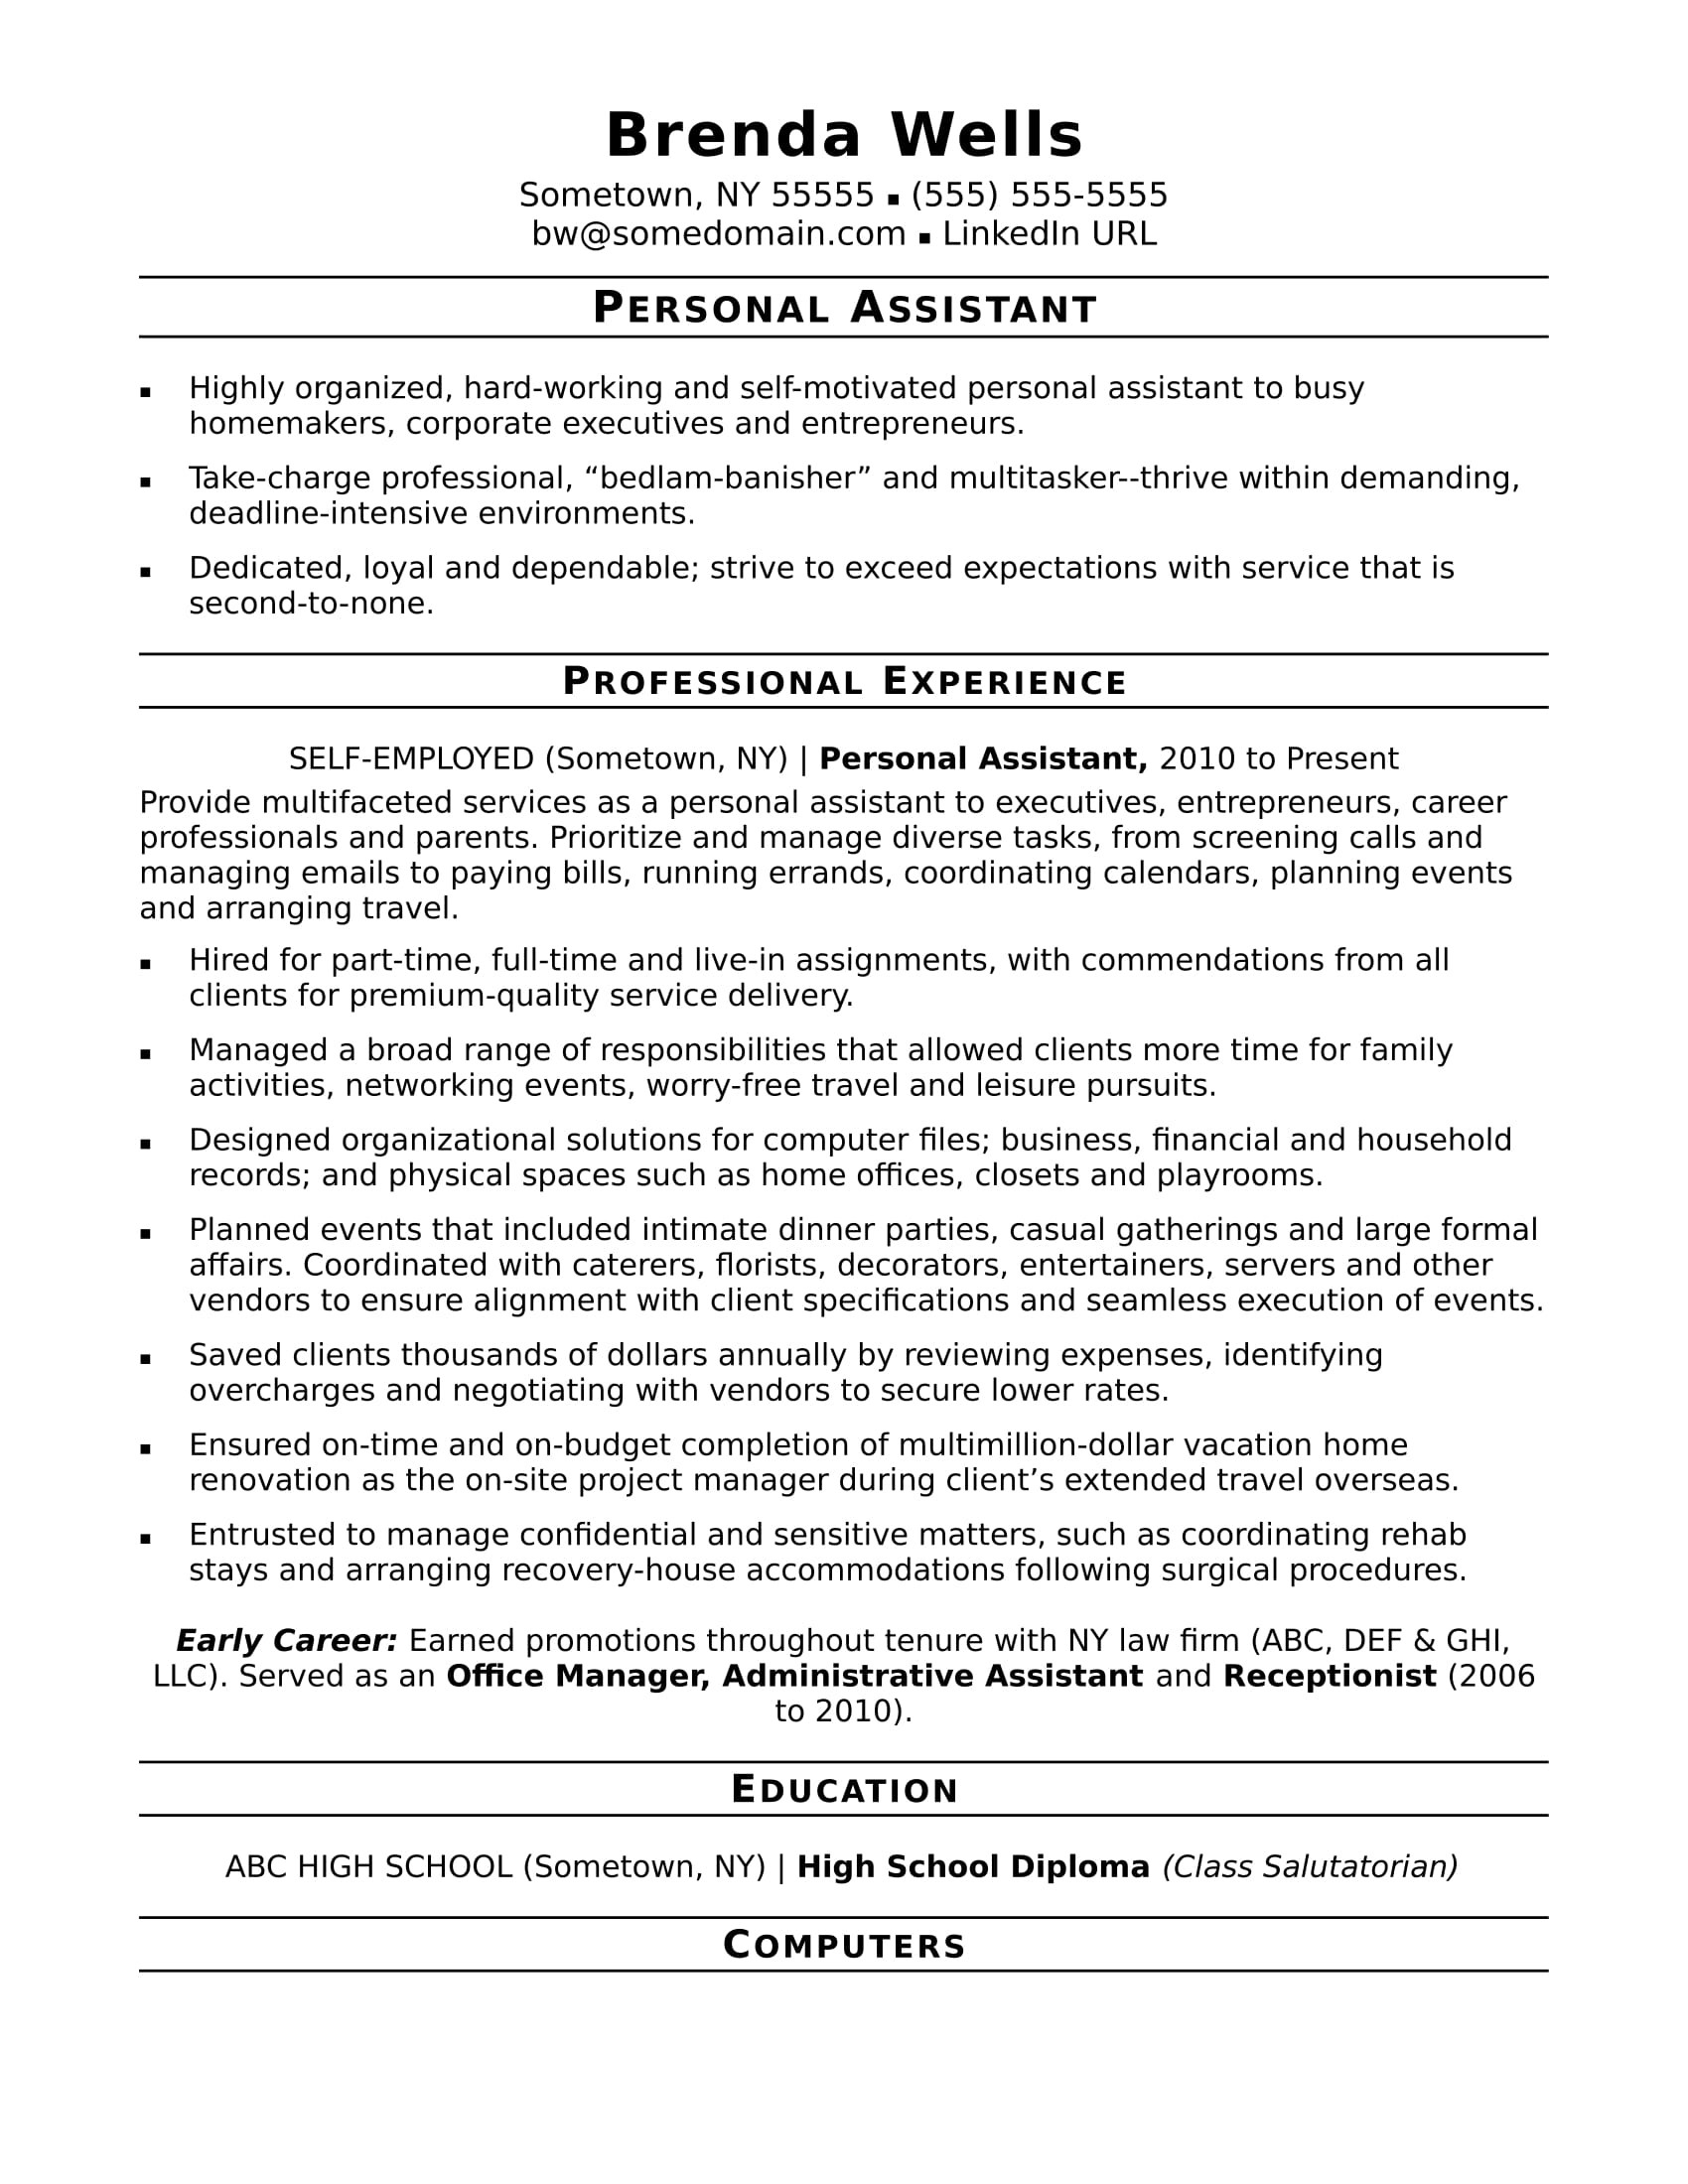 Sample Resume Administrative associate In Surgical Services Personal assistant Resume Monster.com